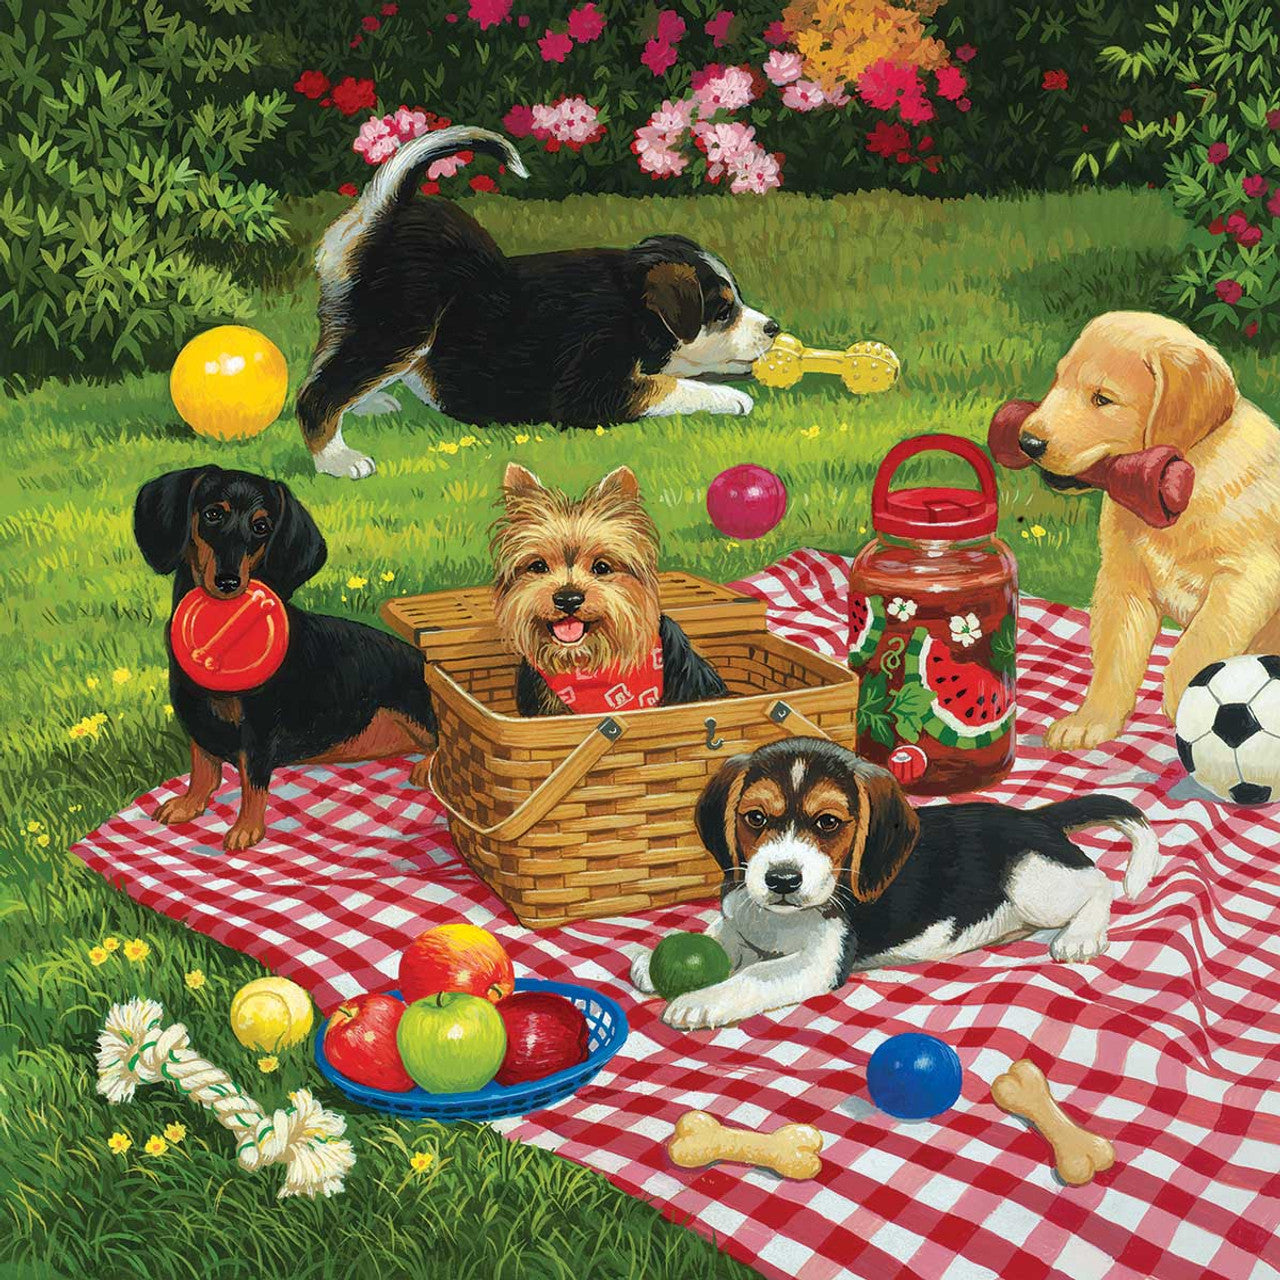 Diamond Painting - Puppy picnic party